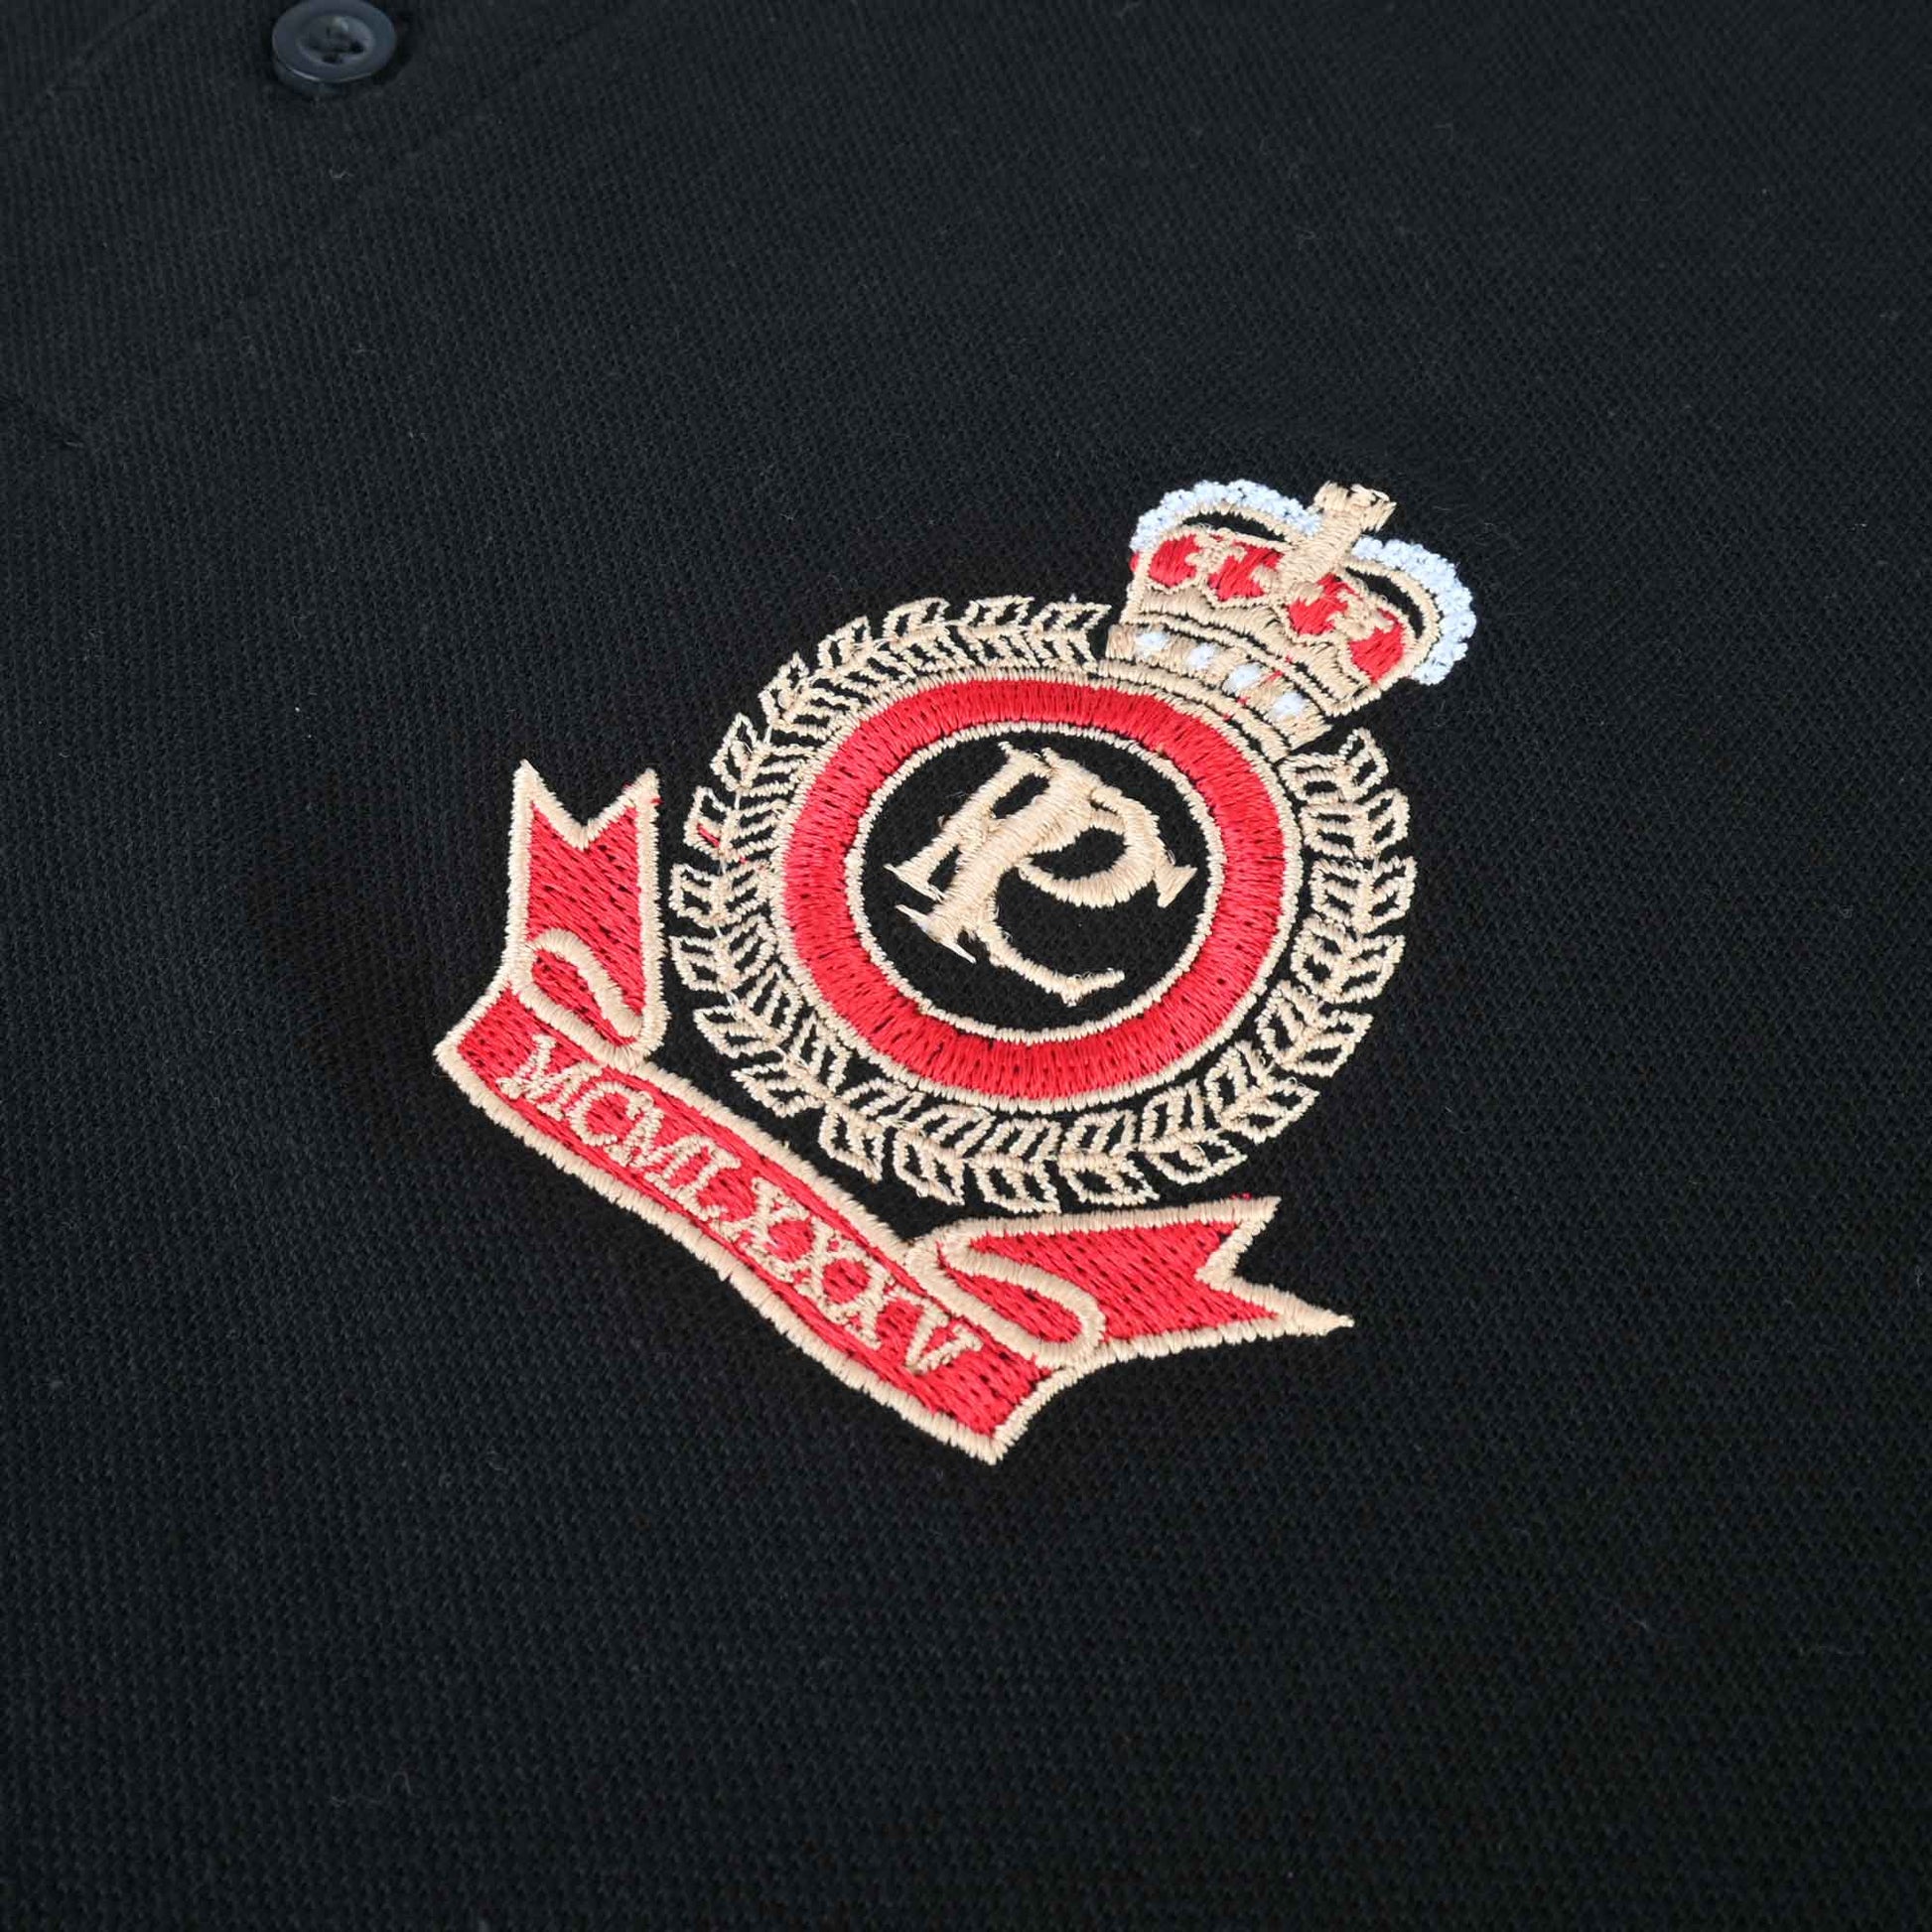 Polo Republica Men's PRC Crest & 85 Embroidered Contrast Panels Polo Shirt